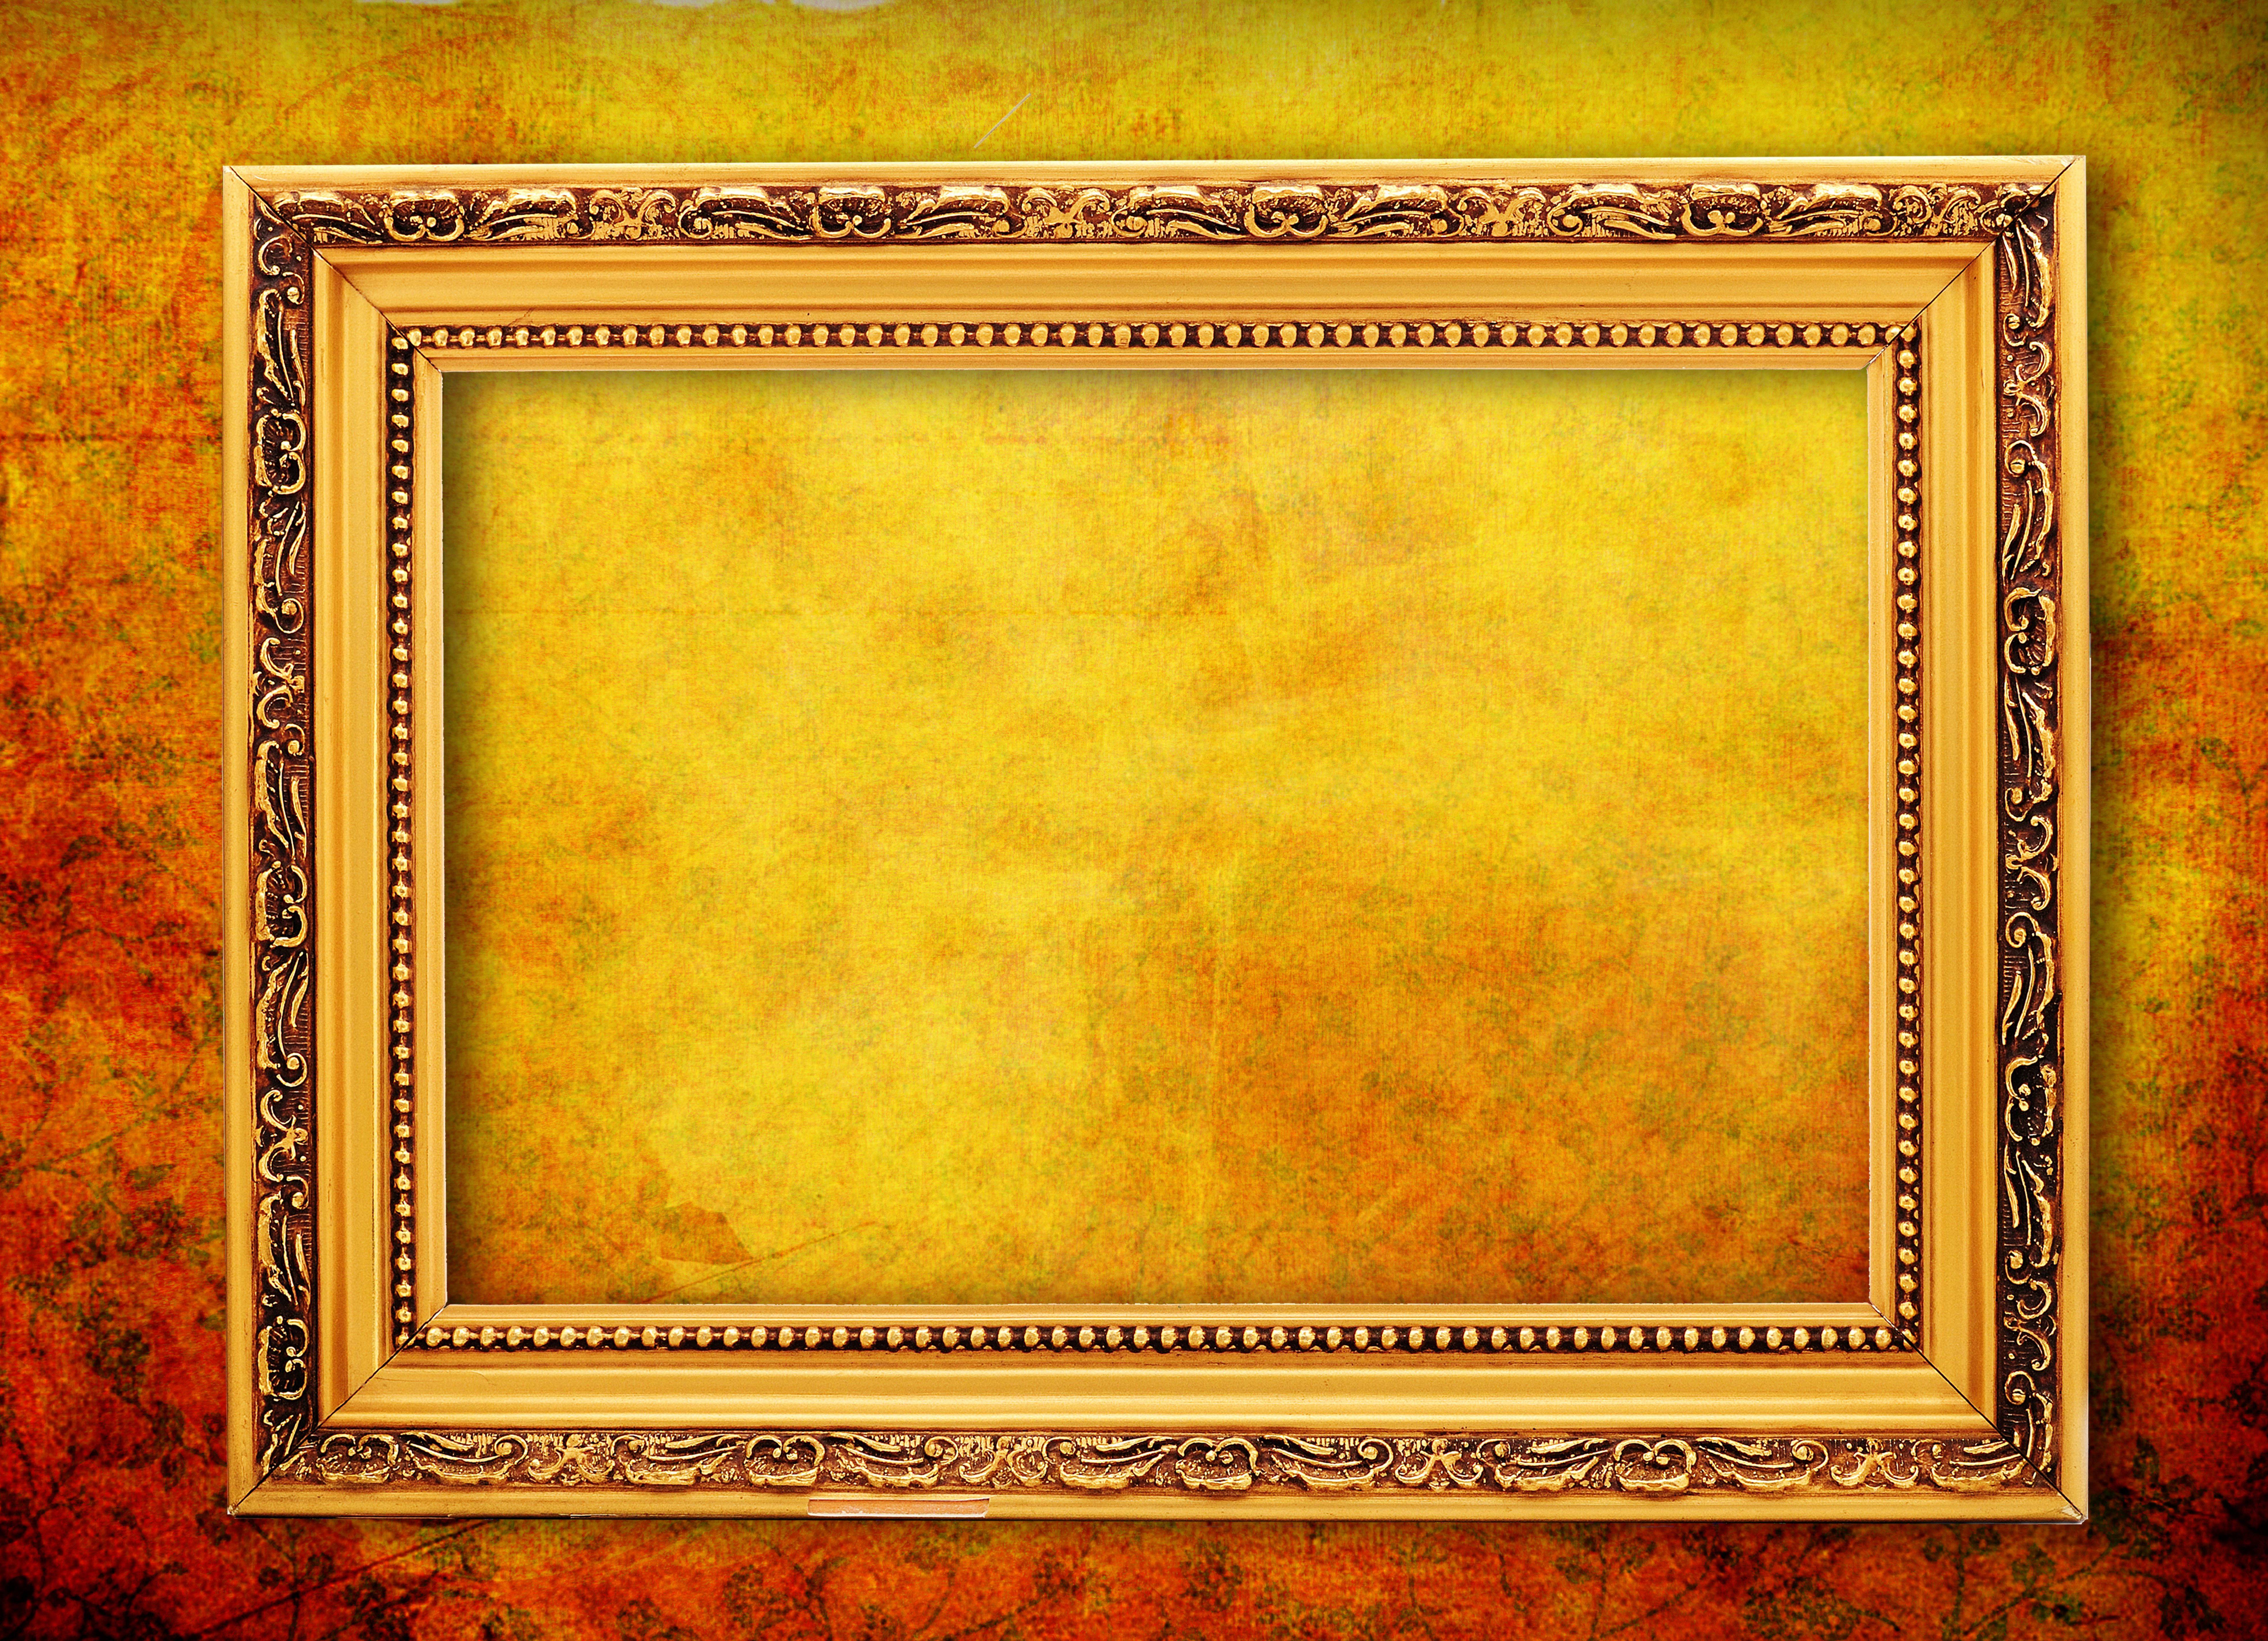 frame wallpaper,picture frame,rectangle,visual arts,painting,interior design